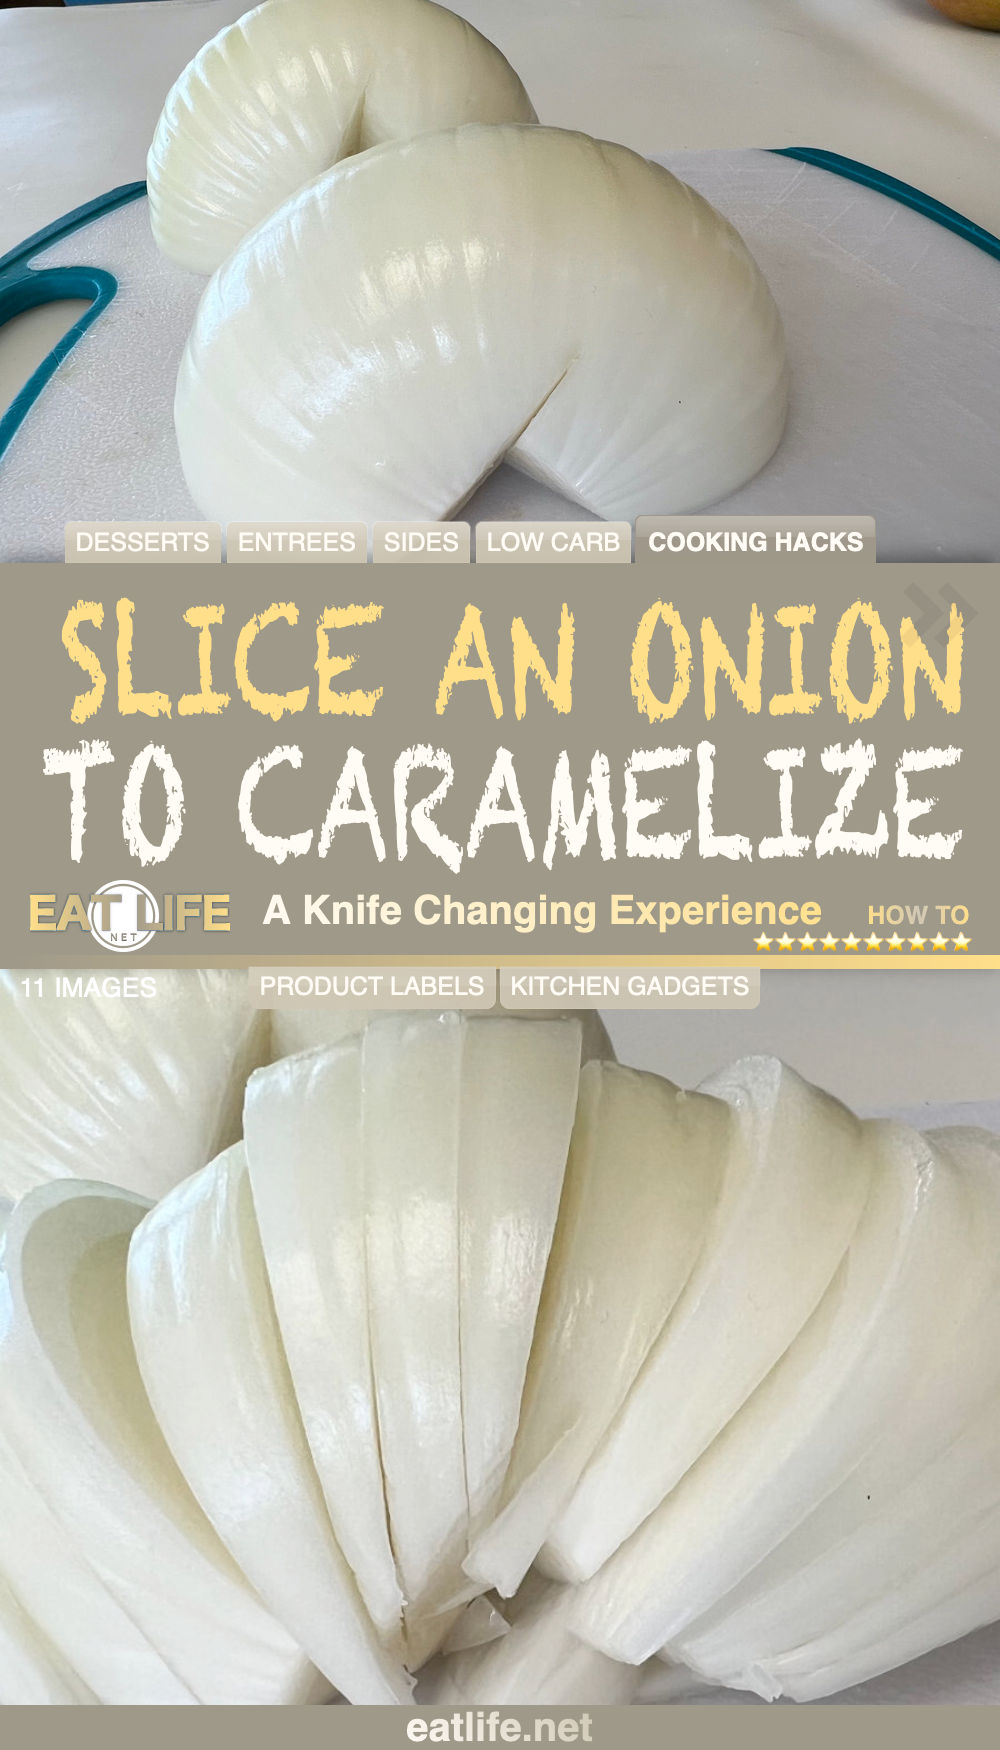 Slice an Onion to Caramelize